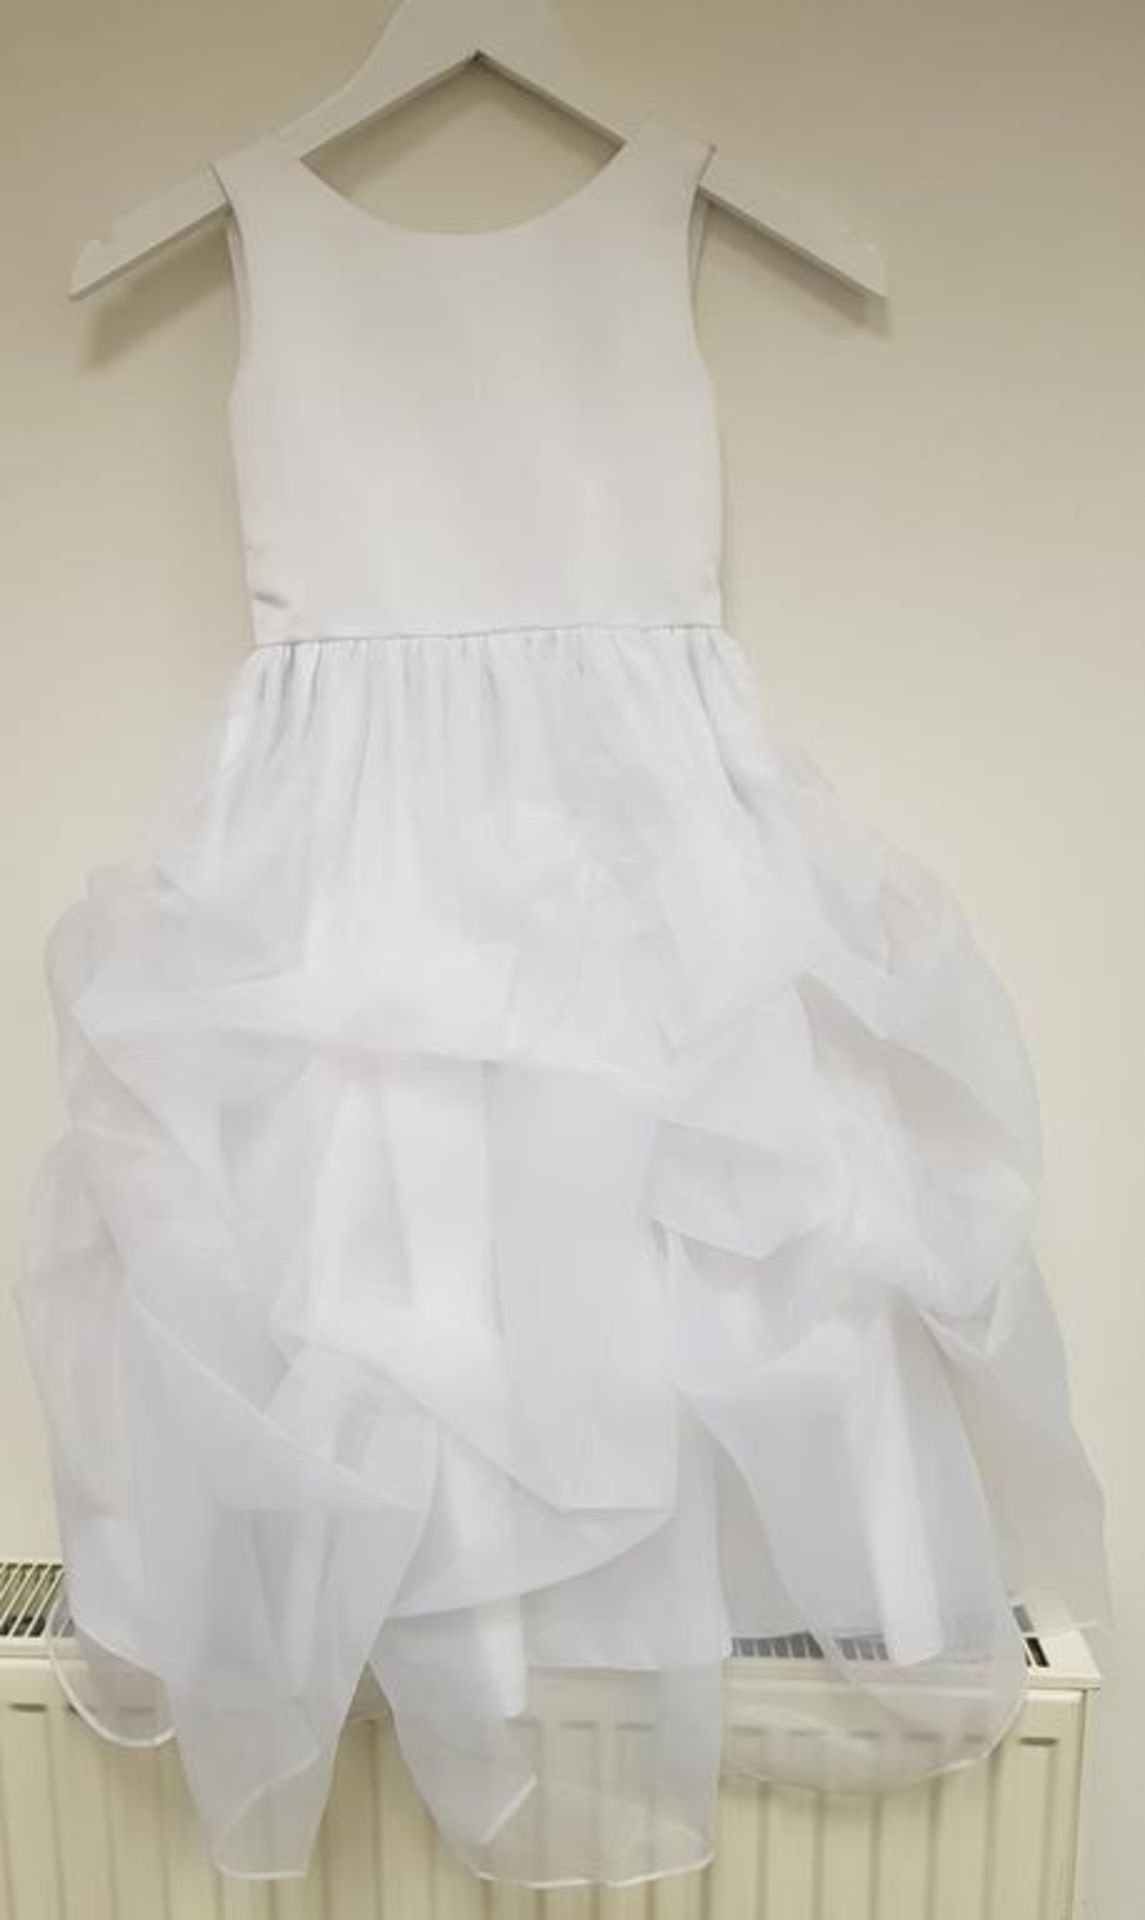 * 17 Childrens Clothing to include Christening/Holy Communion Wear, Makes Sweetie Pie, Jyson, - Image 6 of 16